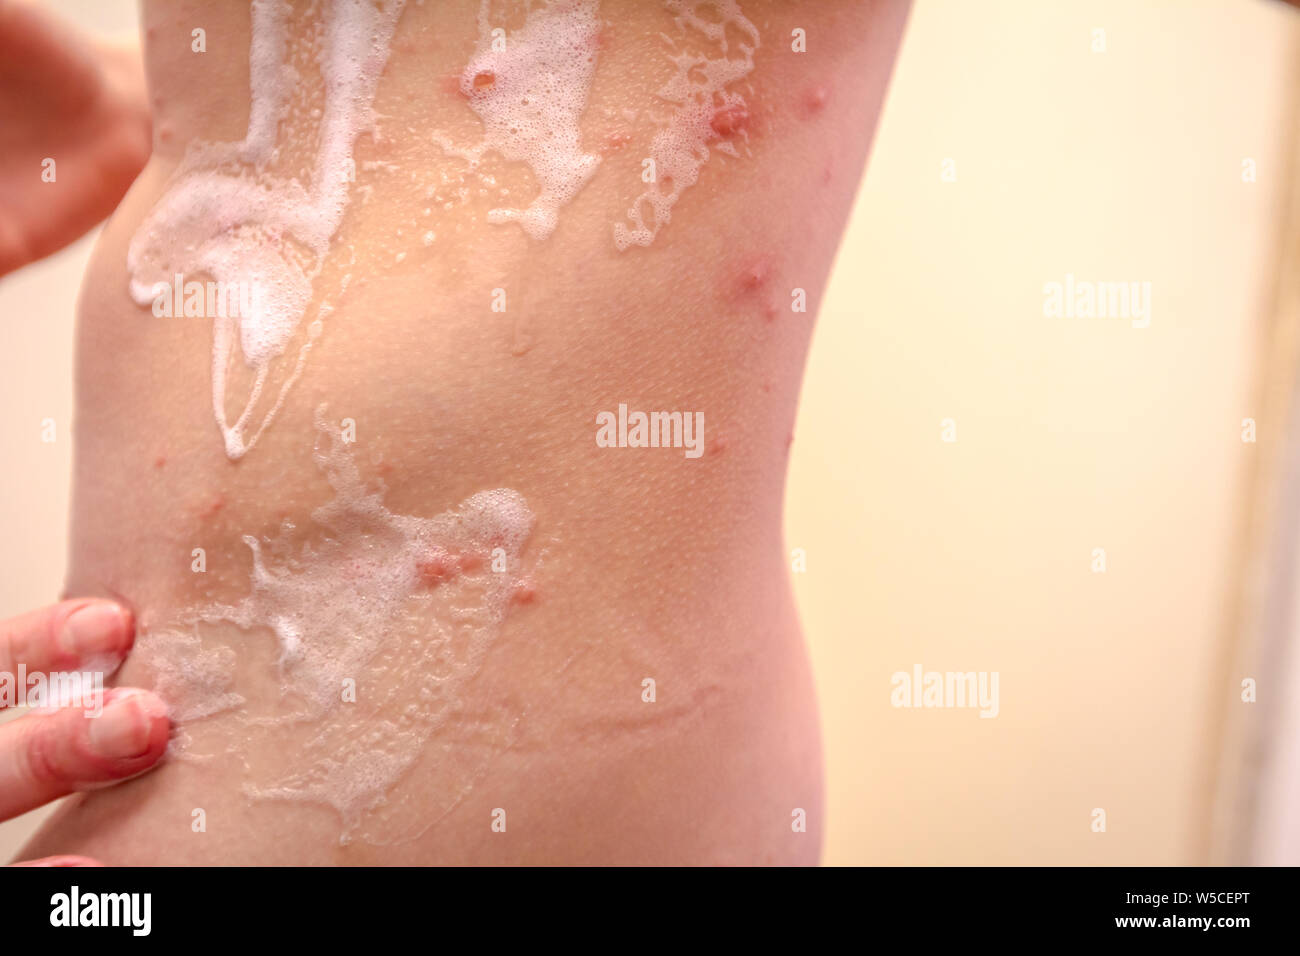 Child skin infected with chickenpox is having treatment using antiseptic foam. Stock Photo